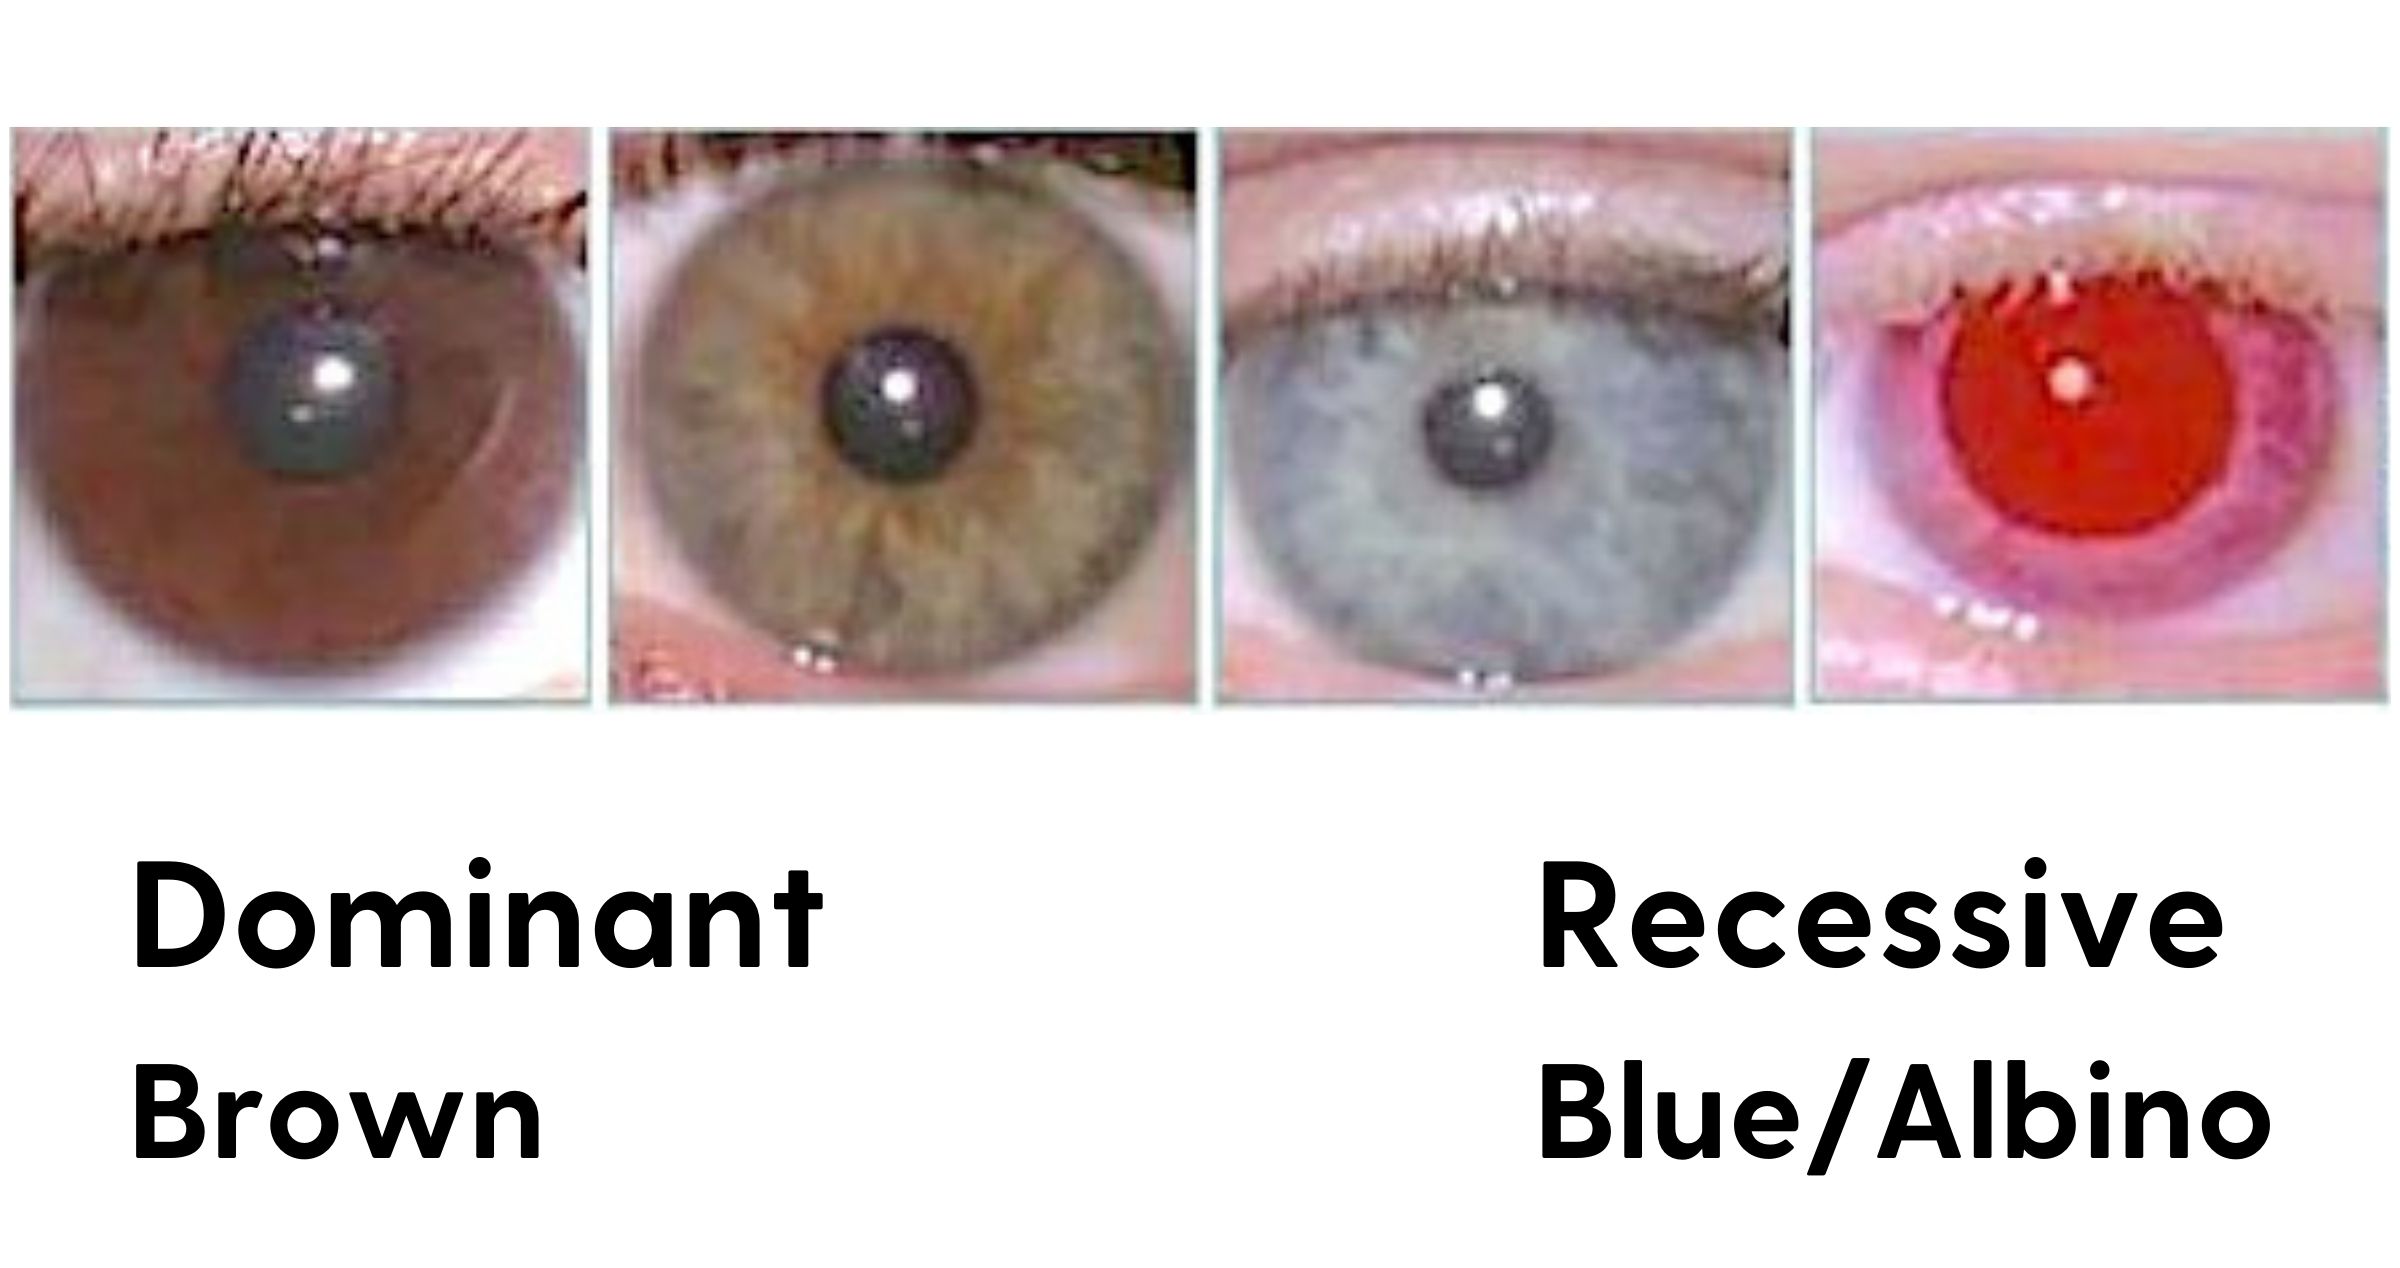 Is anything known about the genetics of eye color beyond brown